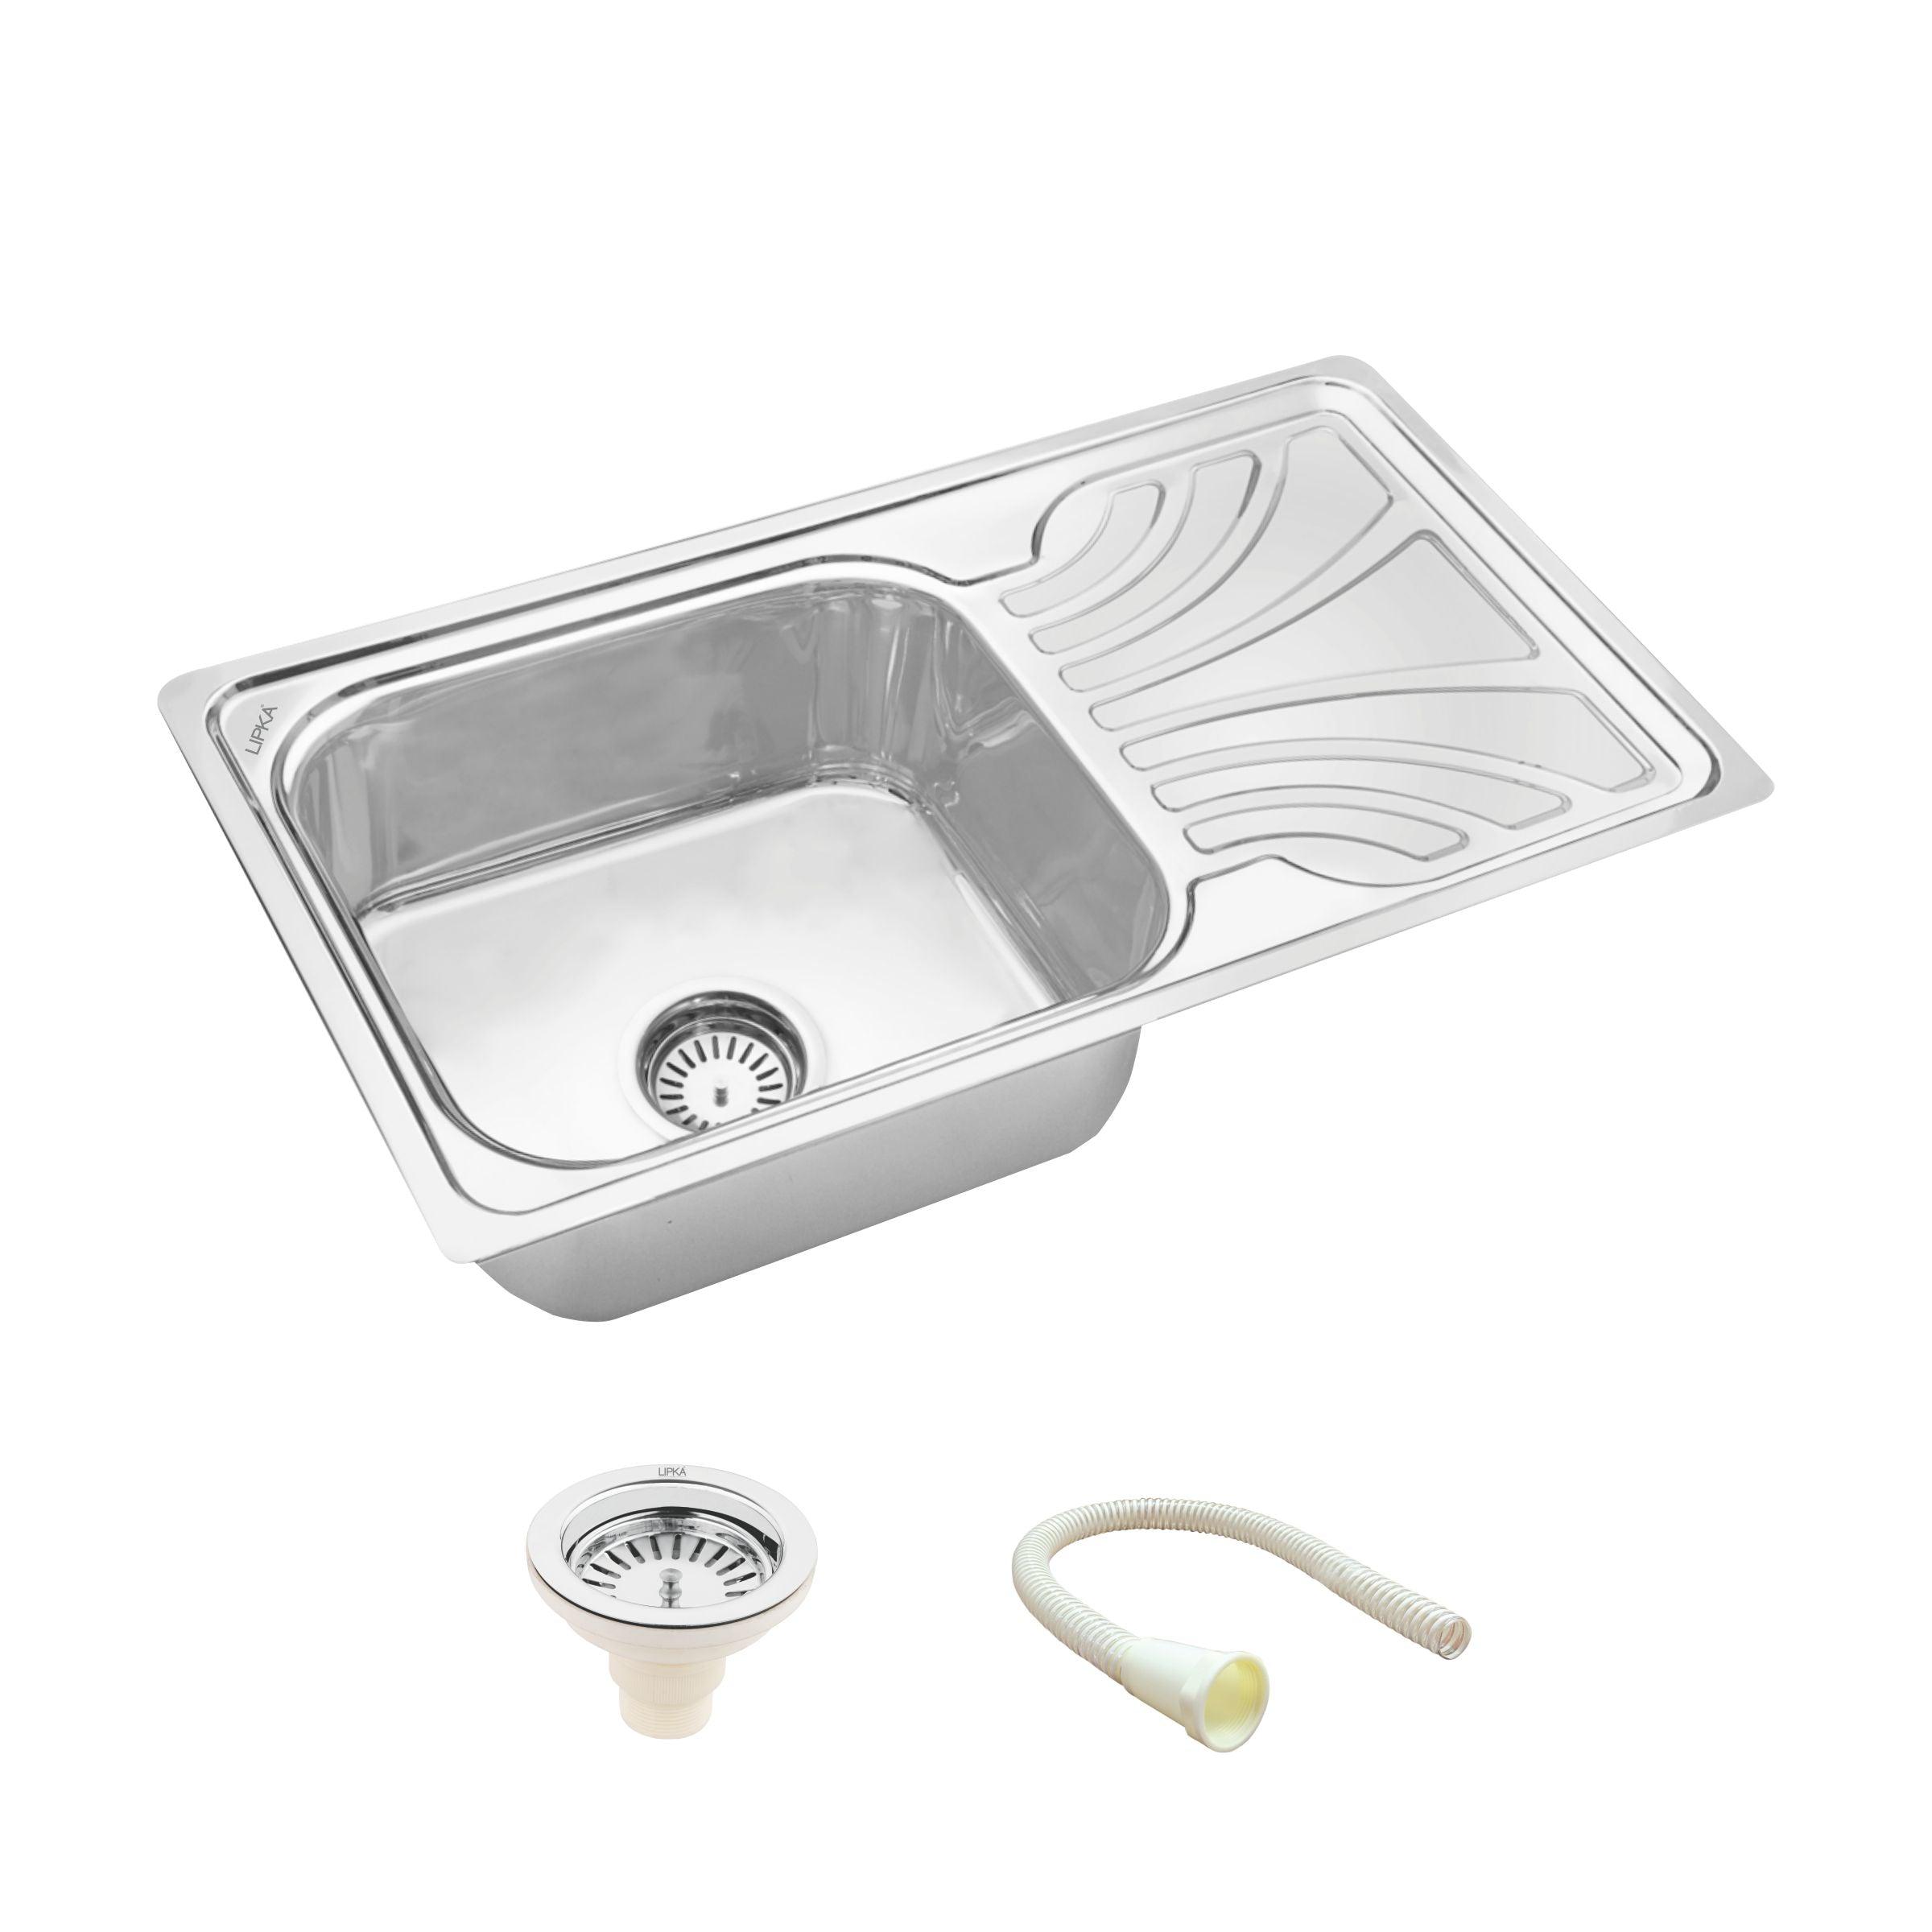 SQUARE SINGLE BOWL WITH DRAINBOARD SINK 304 GRADE 32X18X8 ?v=1707563194